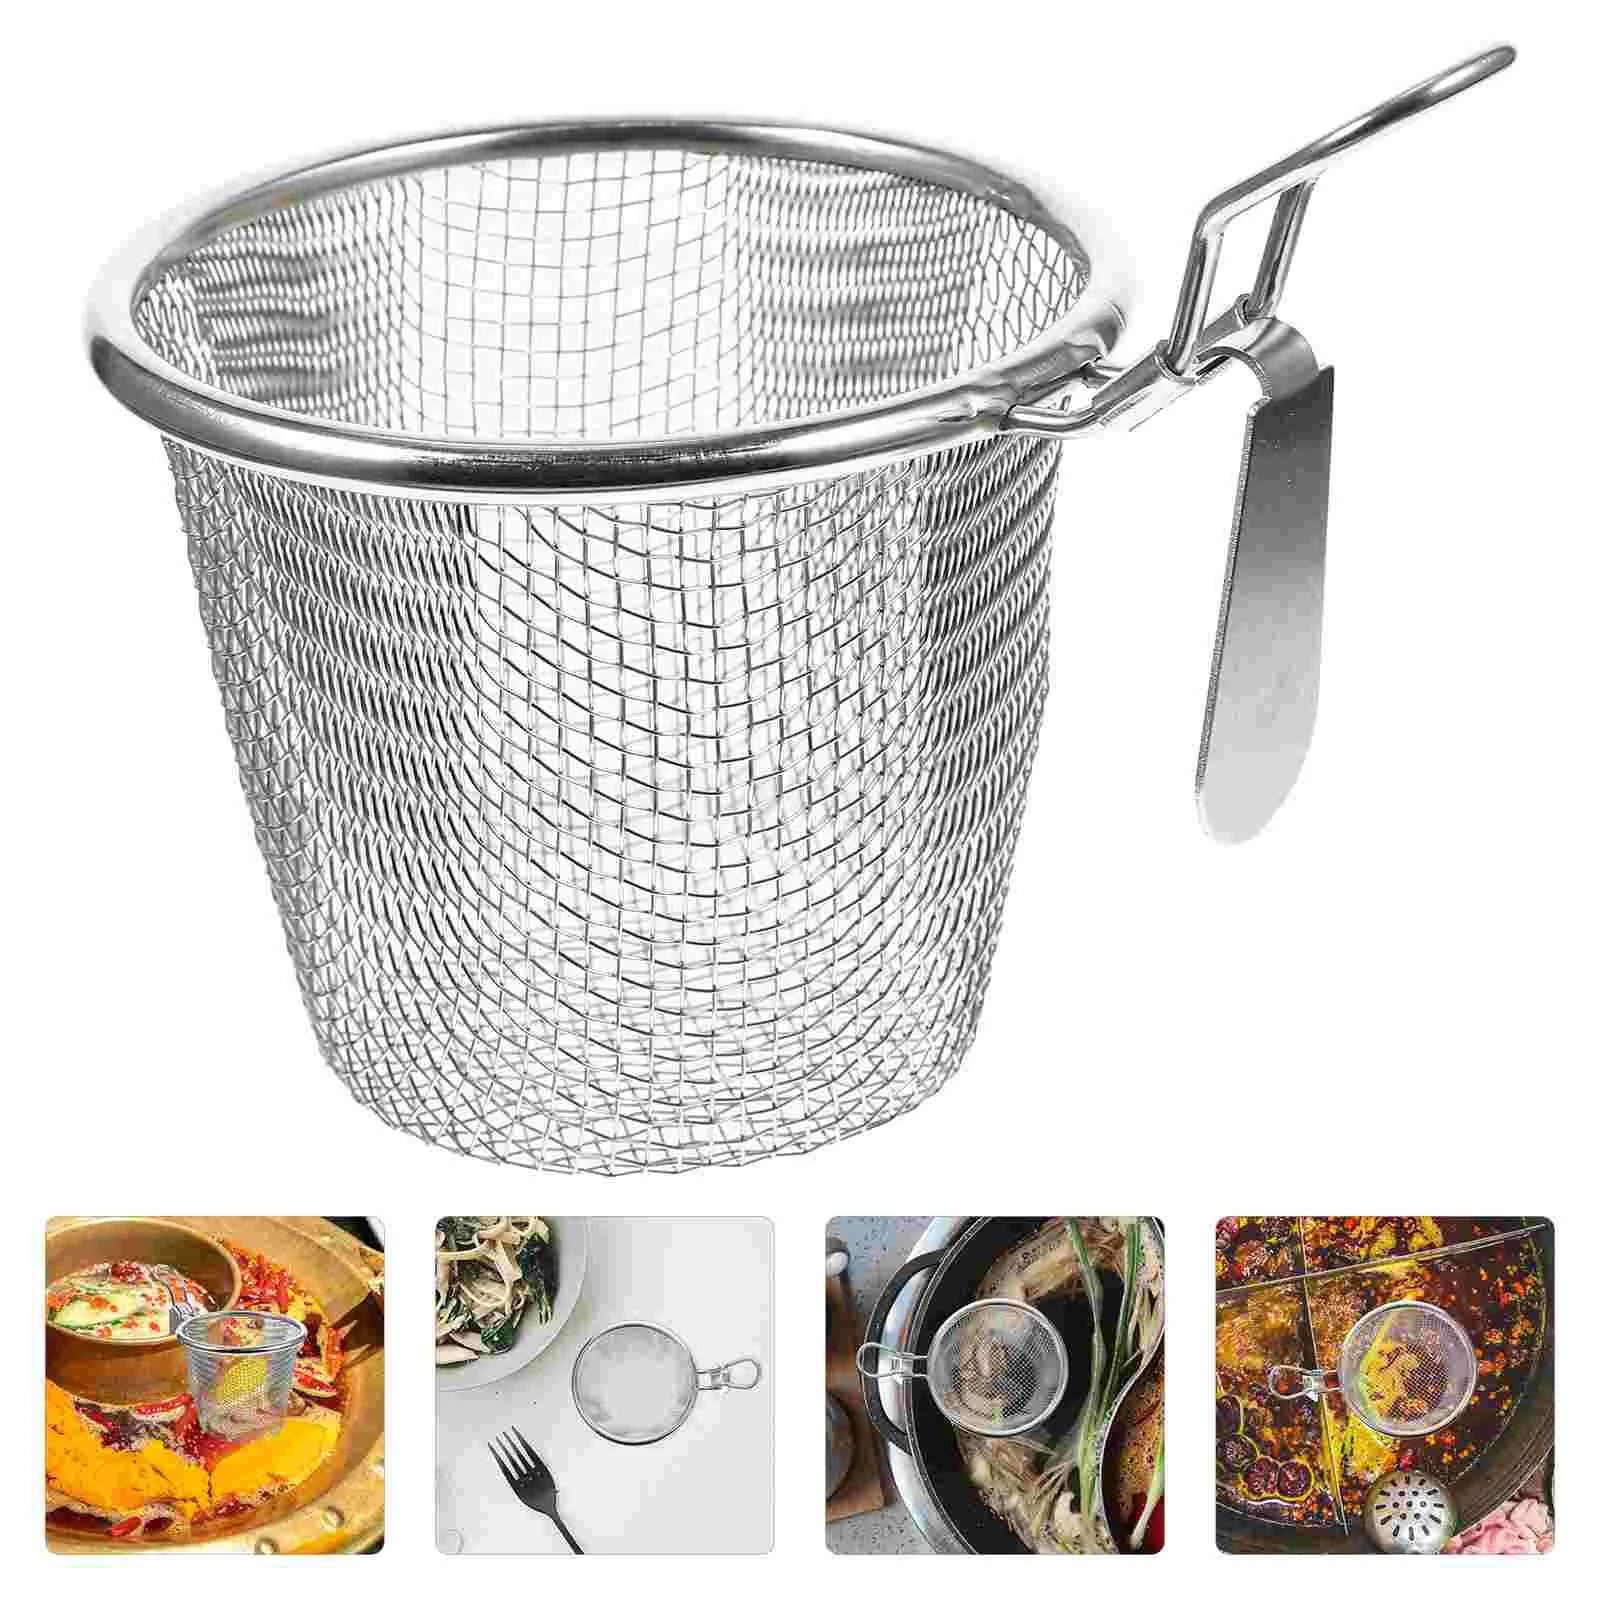 

Pasta Barilla Colander Asian Strainer Ladle Spaghetti O's Handle Noodles Sifter Sieve Basket Spoon